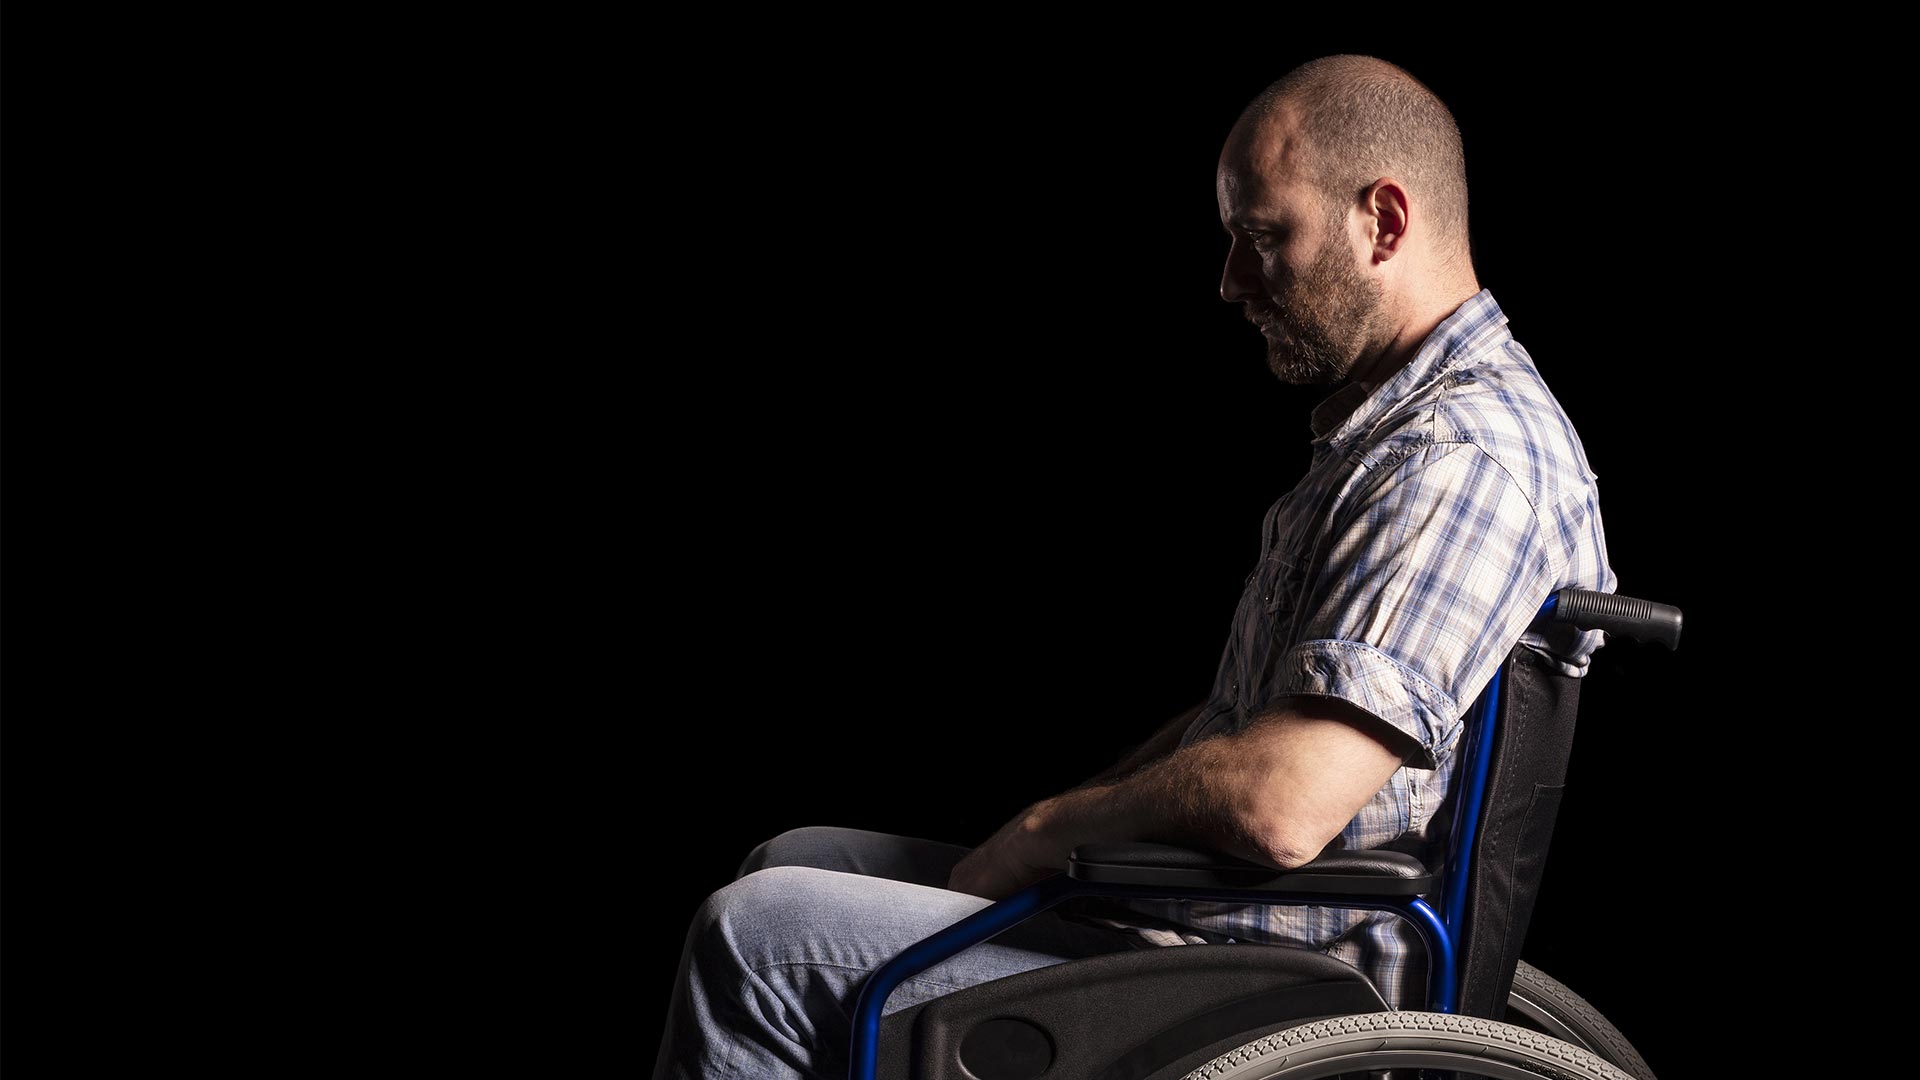 Man in wheelchair sits solemnly against black background to highlight the issue of ndis participant safety